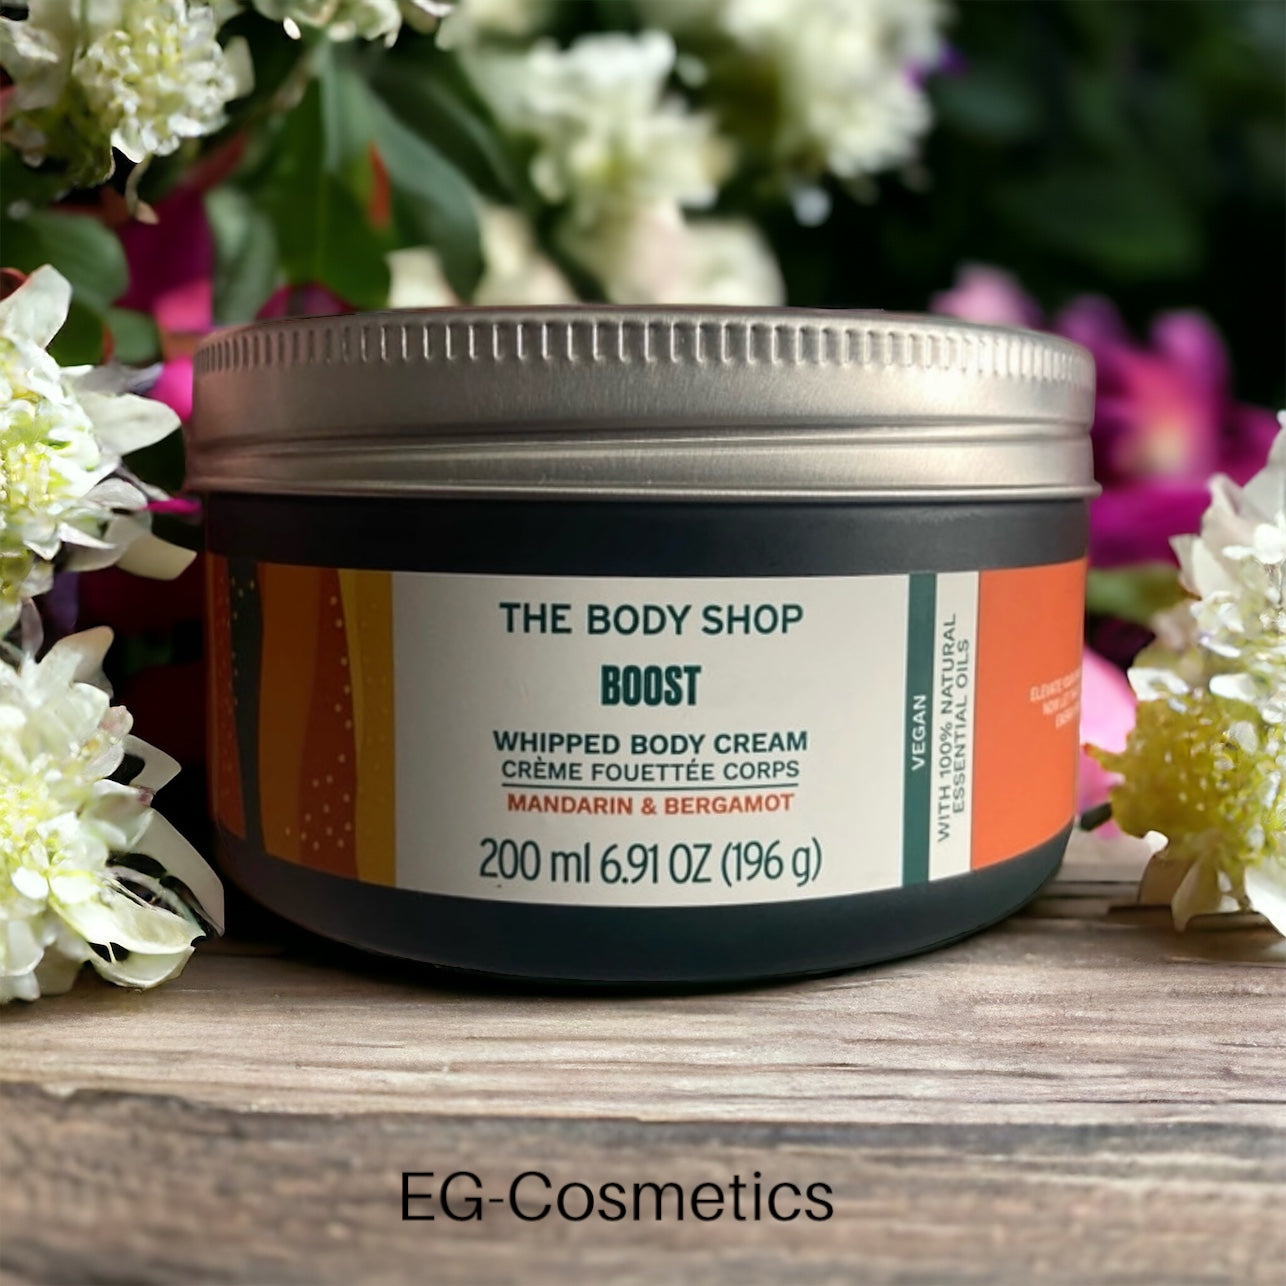 The Body Shop BOOST Whipped Body Cream 200ml